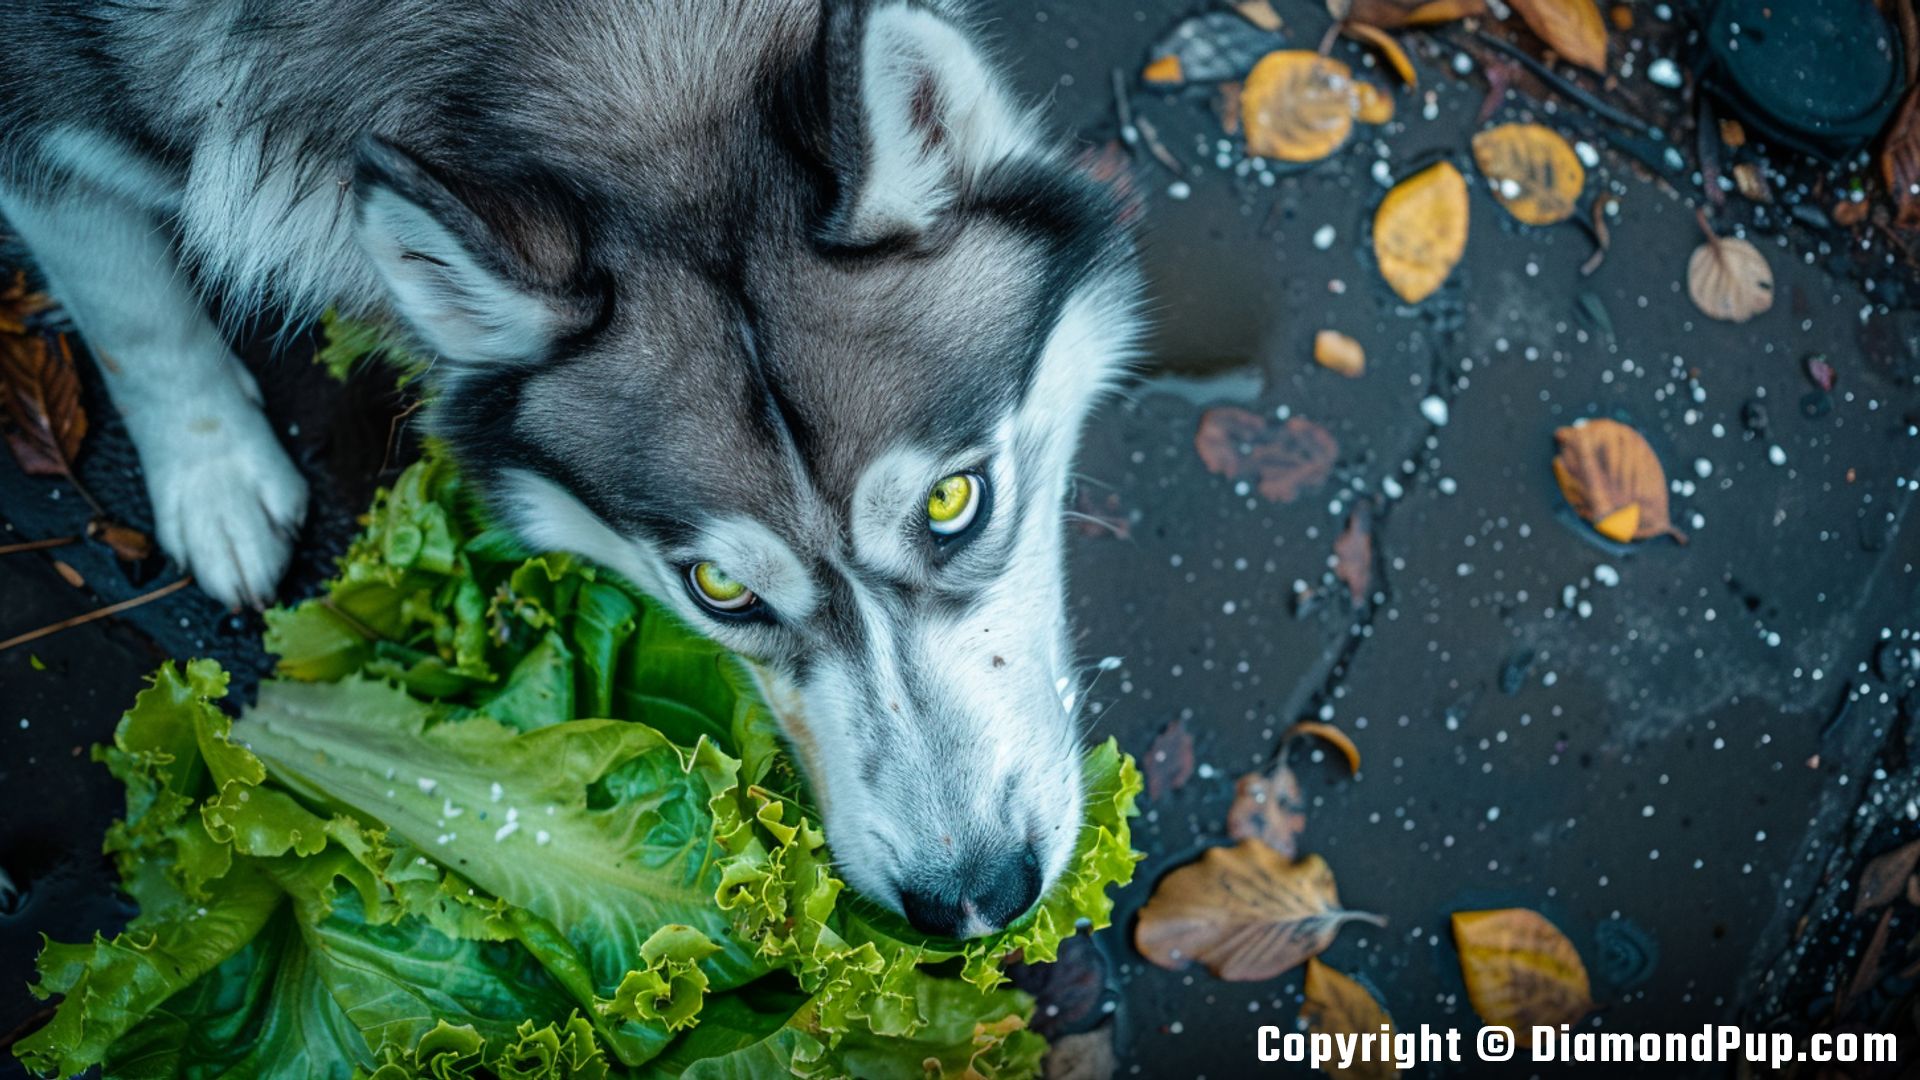 Photo of an Adorable Husky Eating Lettuce